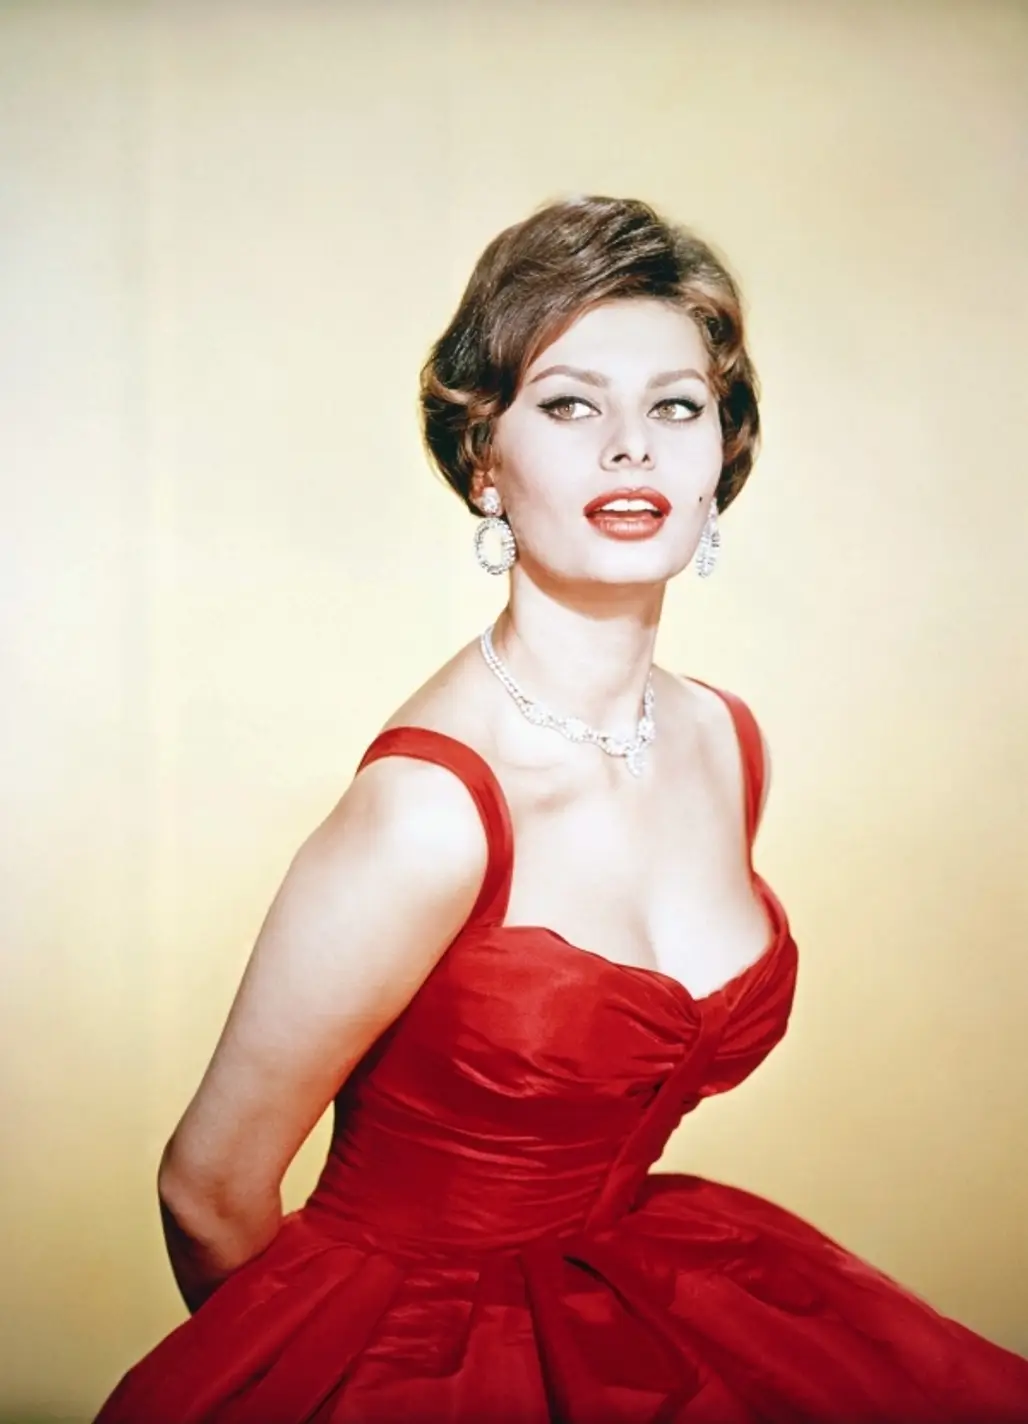 "Getting Ahead in a Difficult Profession Requires Avid Faith in Yourself. That is Why Some People with Mediocre Talent, but with Great Inner Drive, Go so Much Further than People with Vastly Superior Talent" Sophia Loren